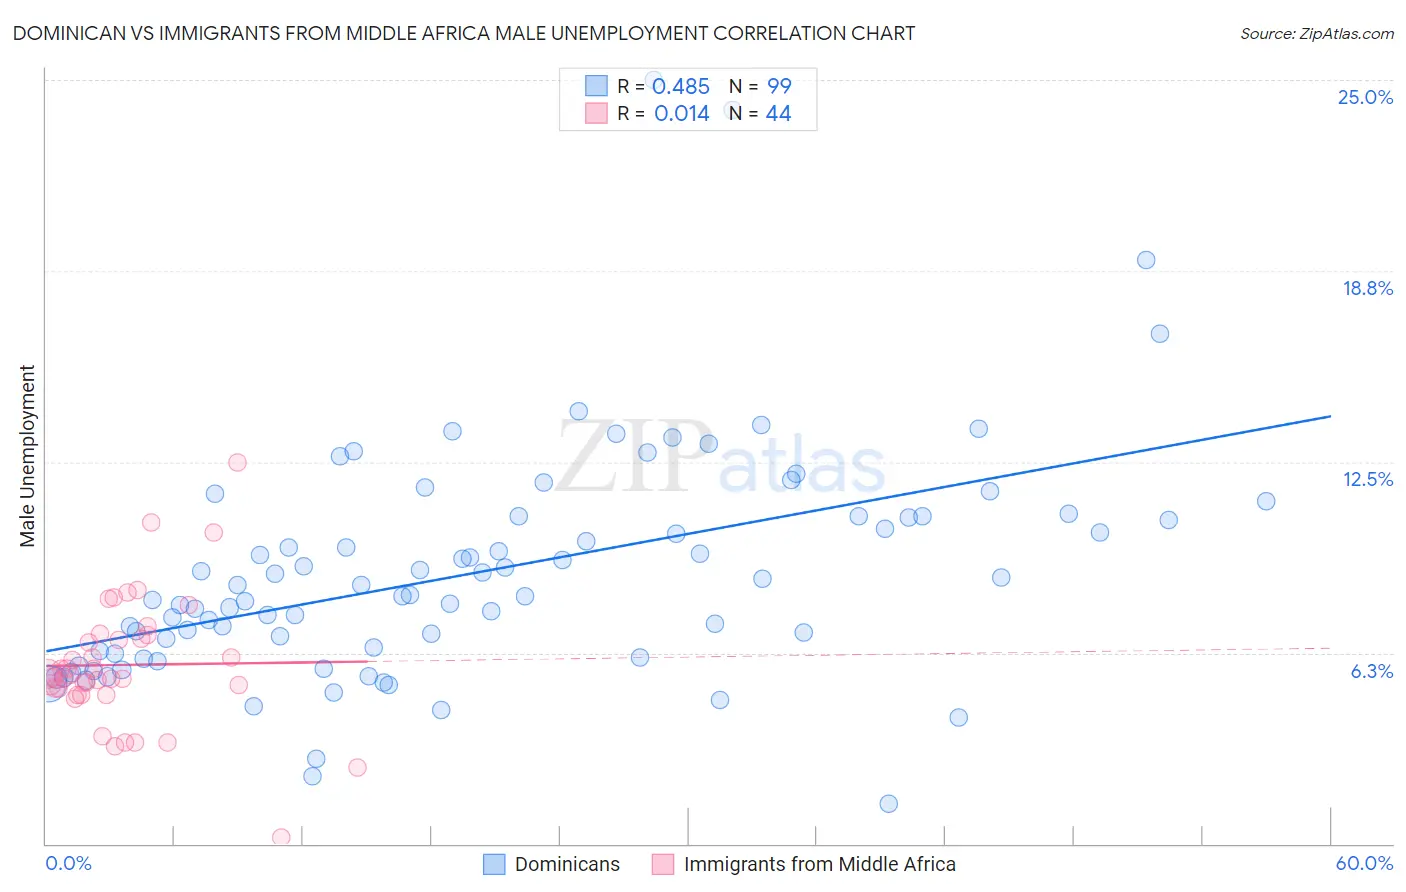 Dominican vs Immigrants from Middle Africa Male Unemployment